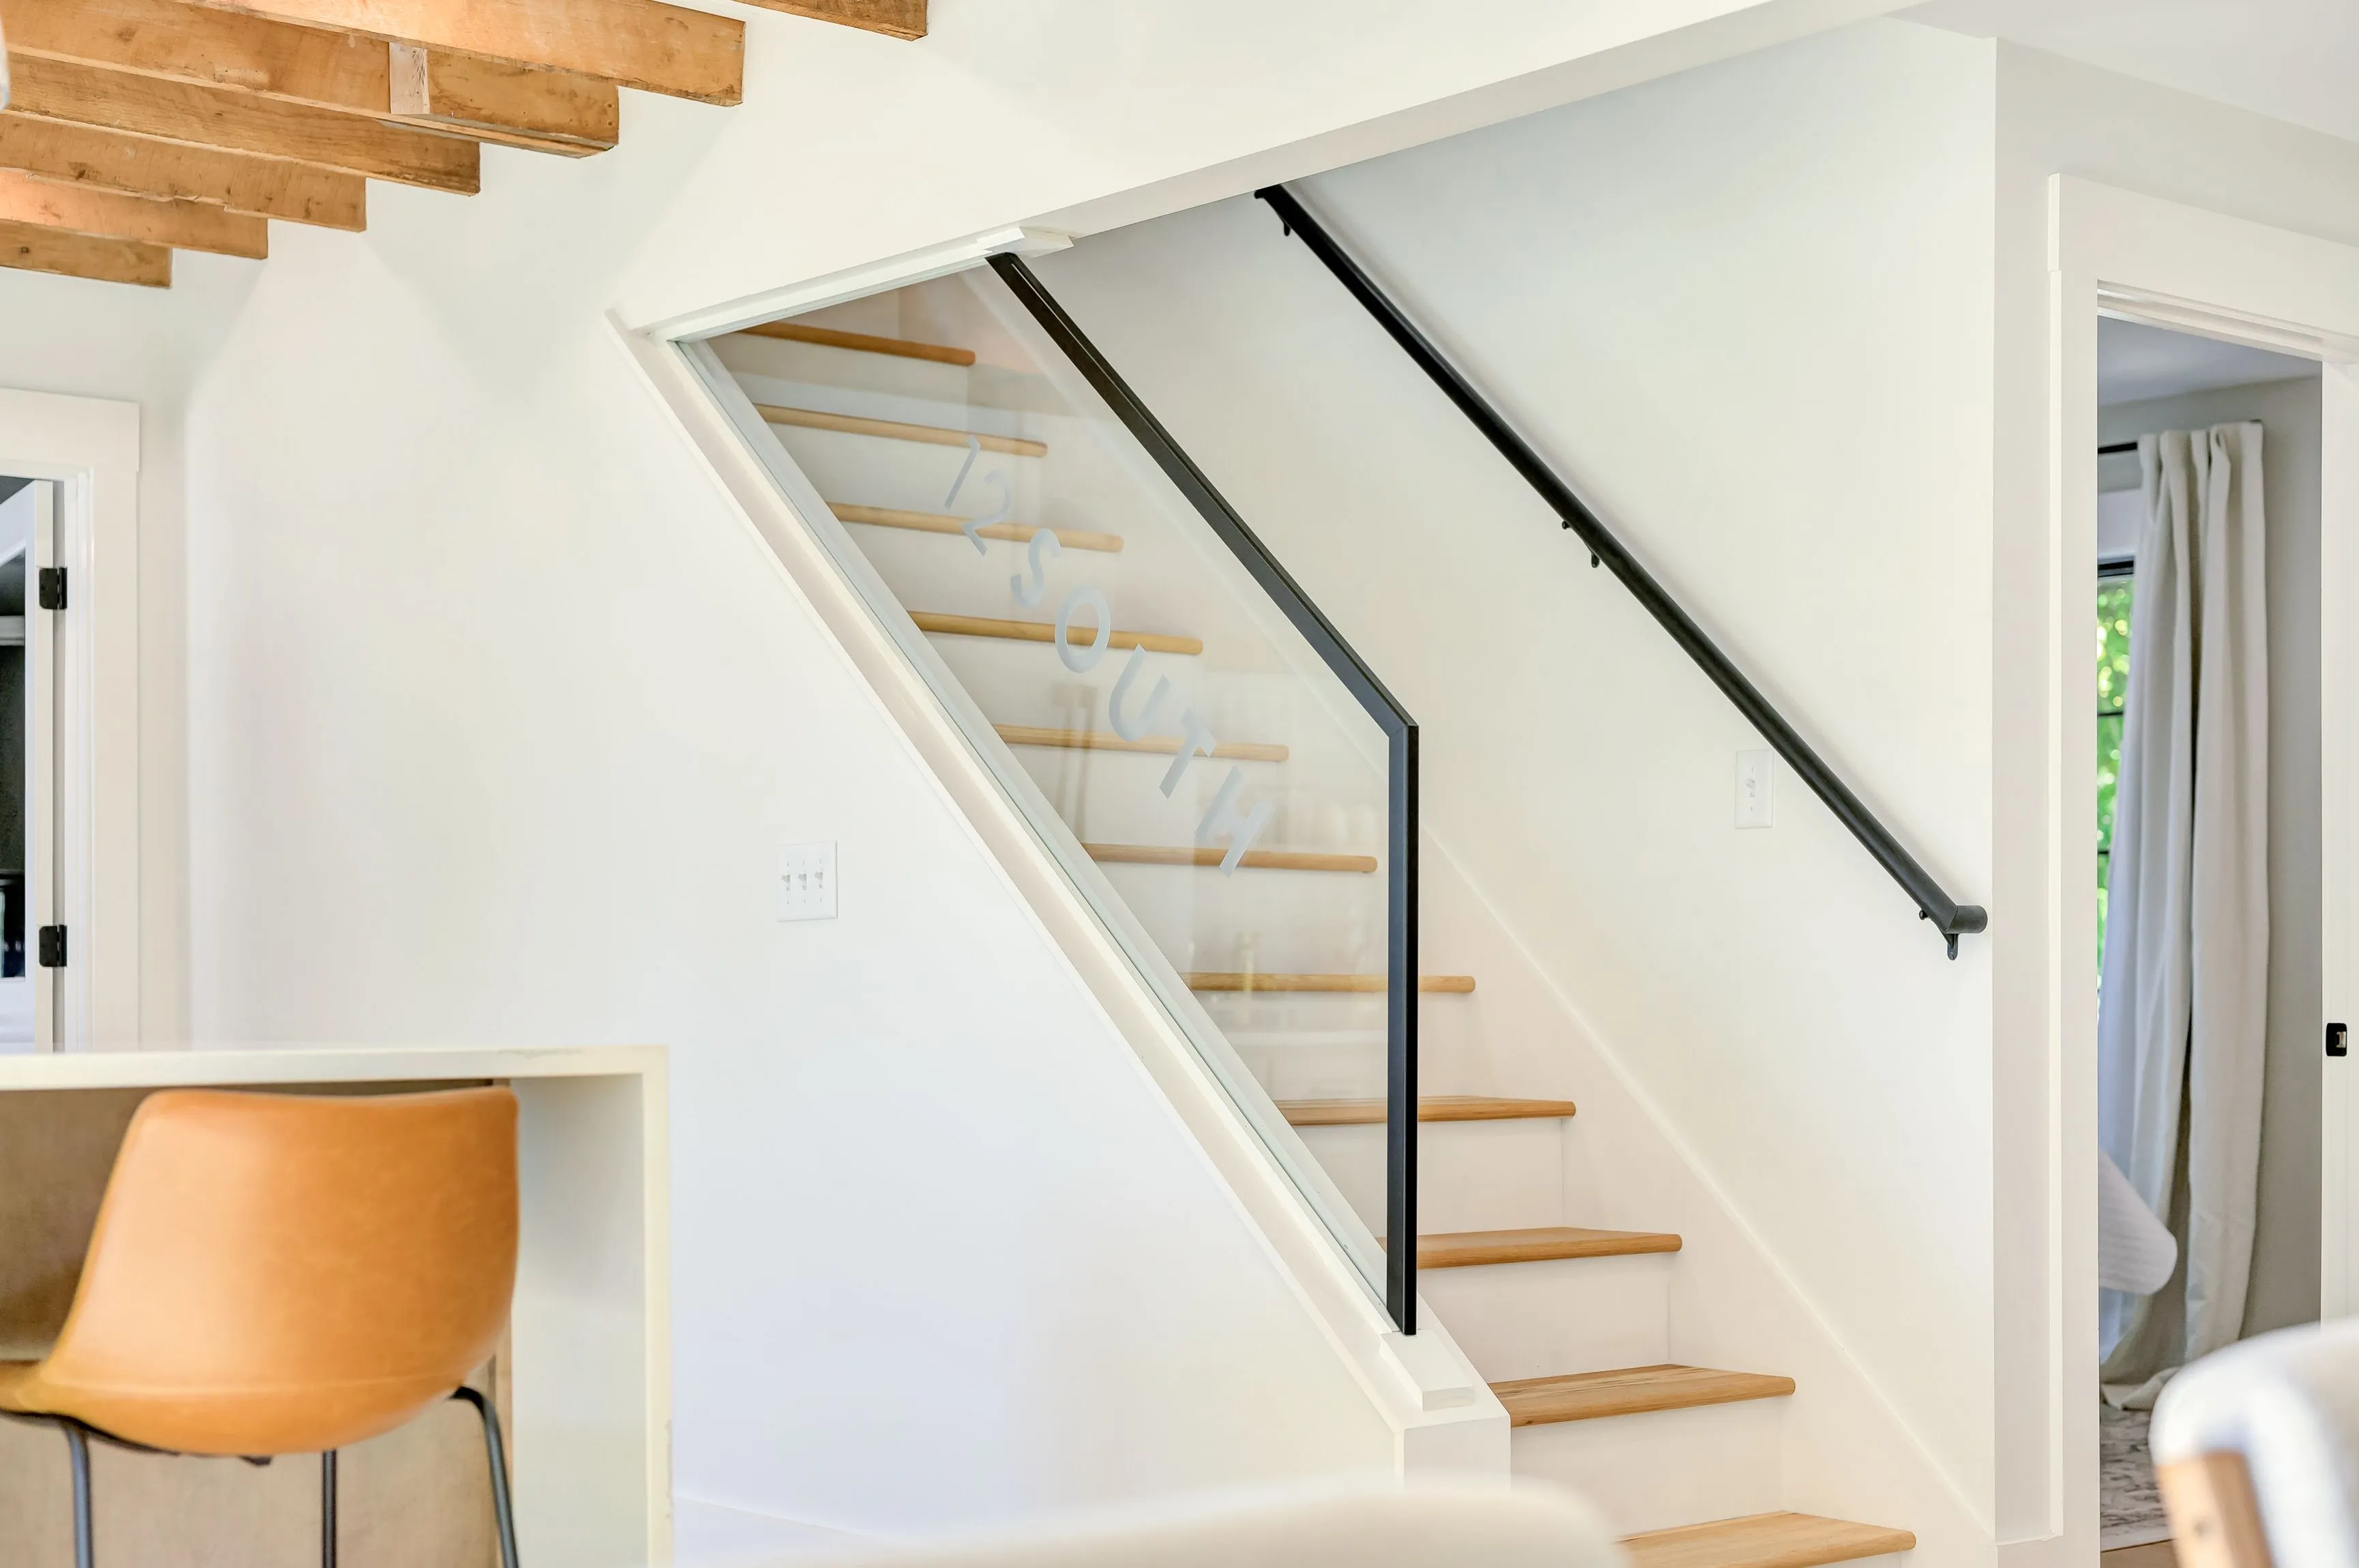 Modern staircase with wooden steps and black metal railing in a bright home interior with white walls and exposed wooden beams.